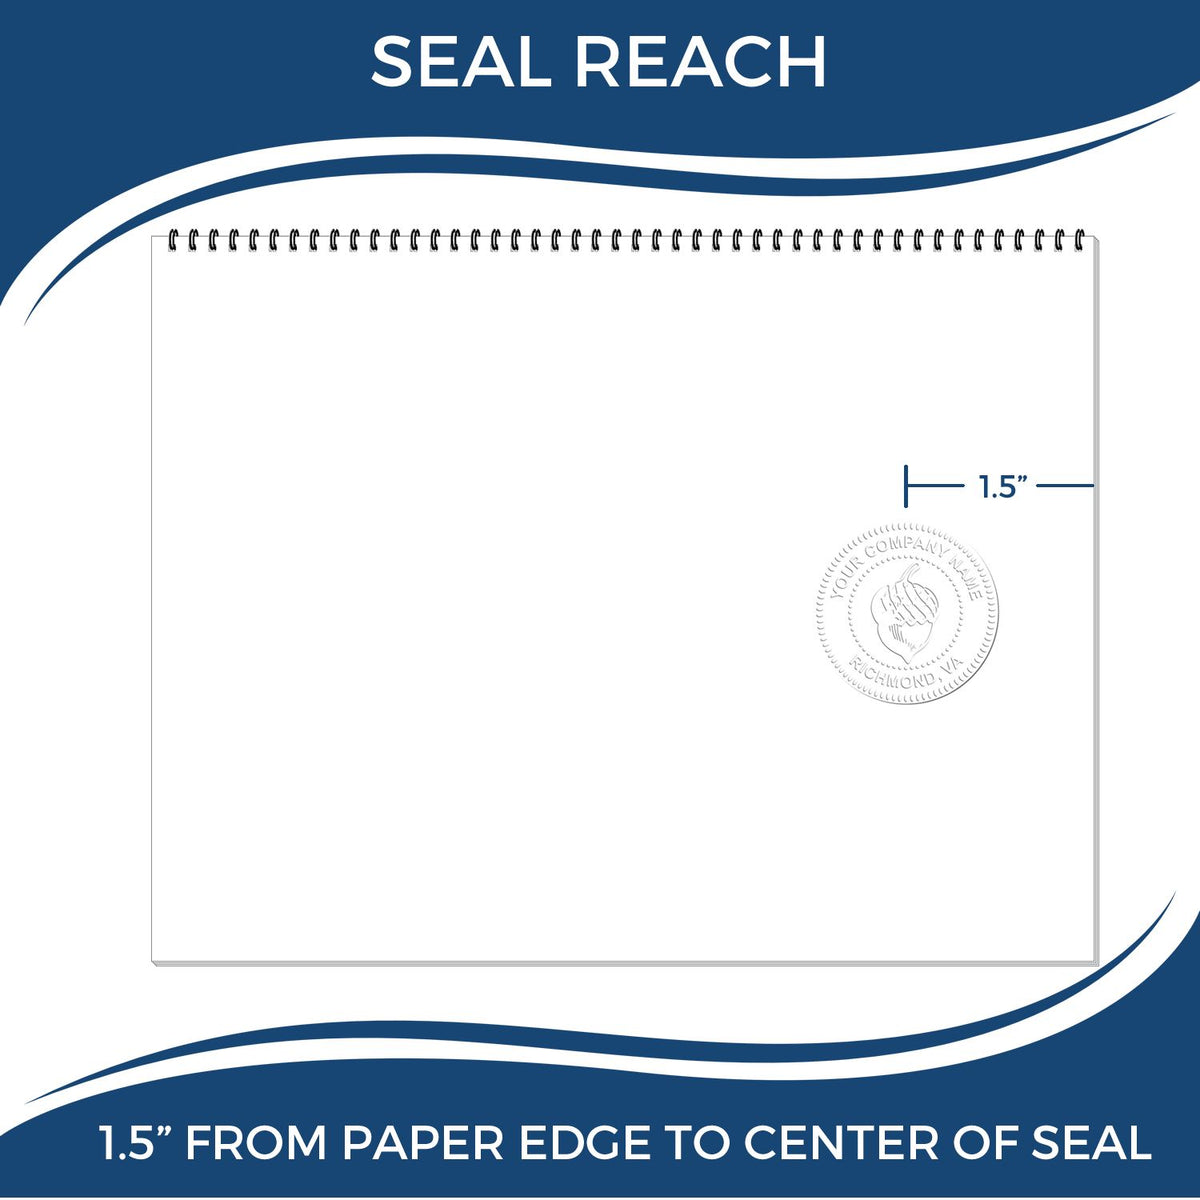 An infographic showing the seal reach which is represented by a ruler and a miniature seal image of the Hybrid Missouri Architect Seal